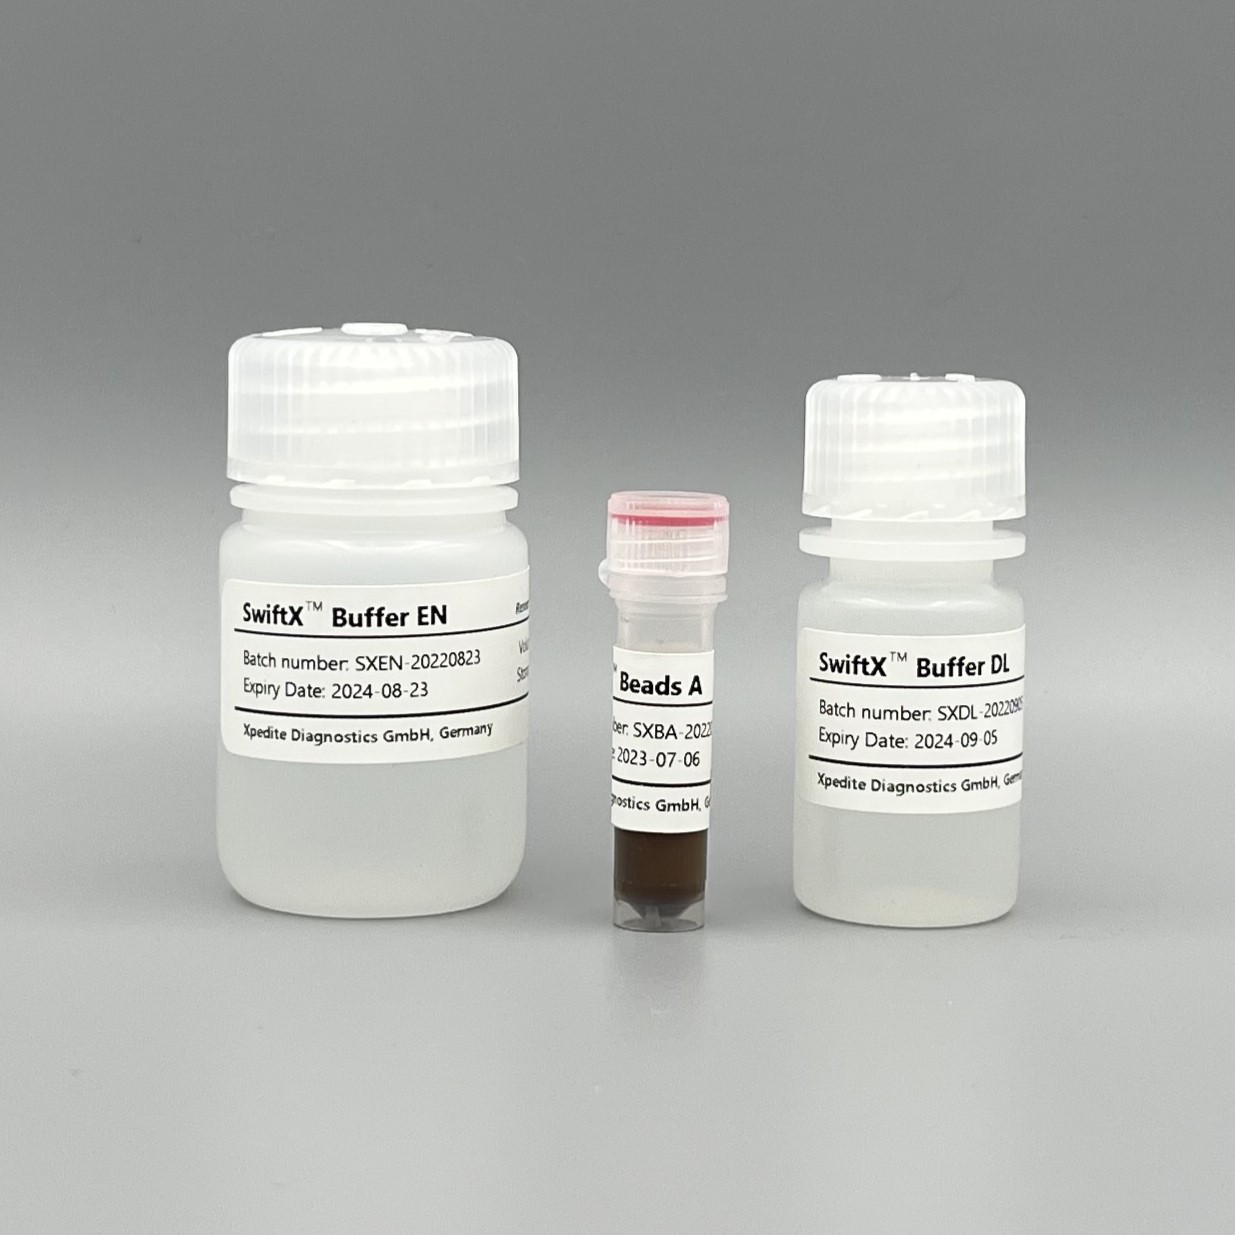 SwiftX DNA Kit for rapid extraction of DNA and RNA